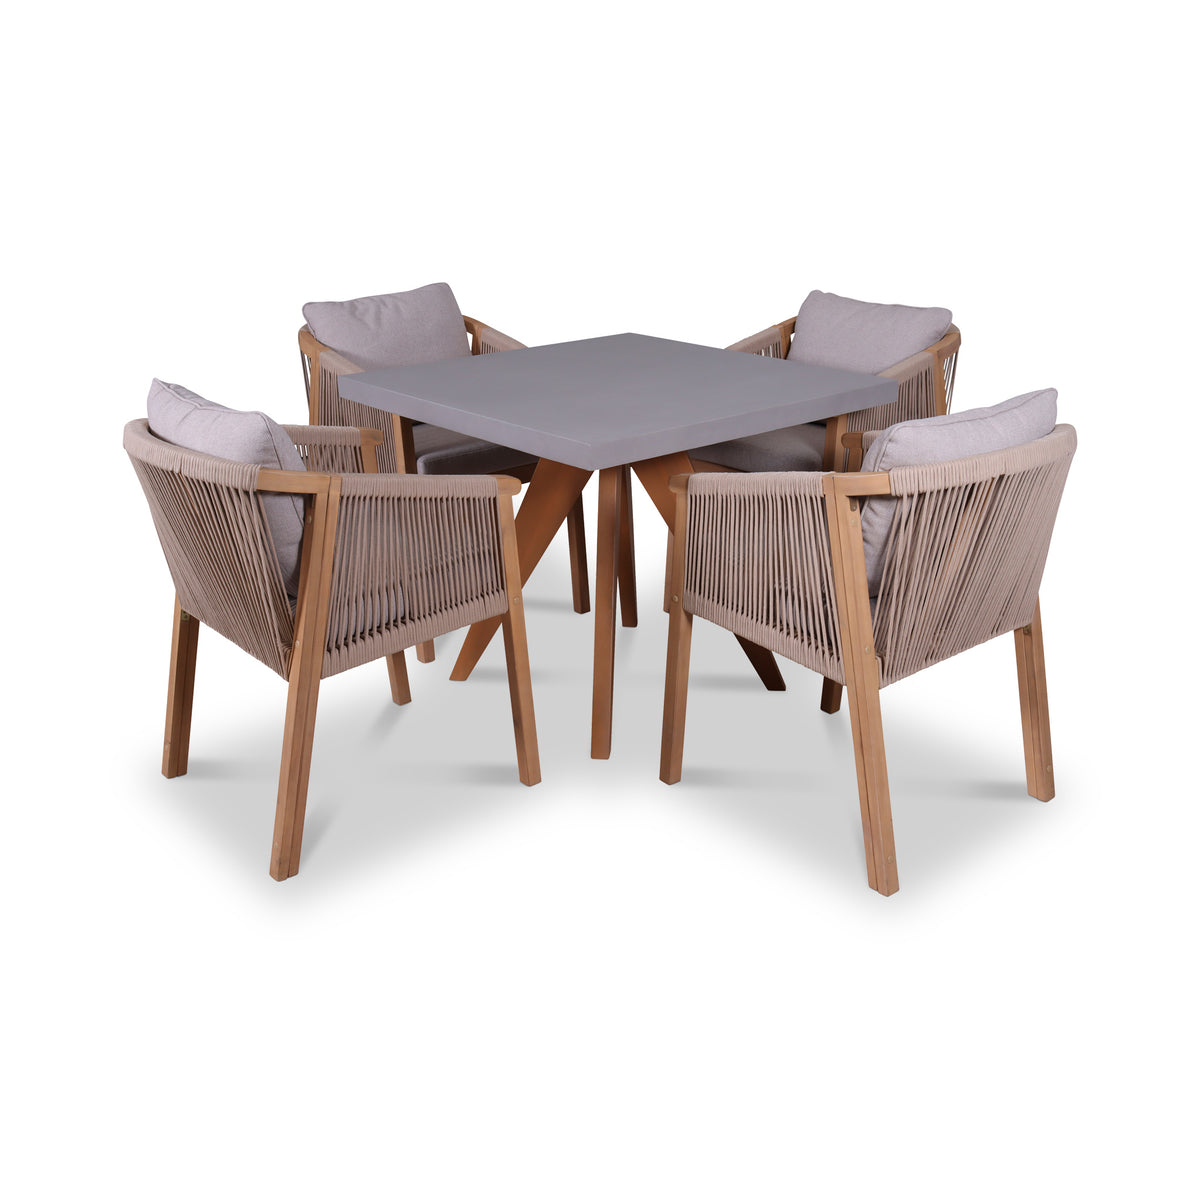 Luna 90cm Square Concrete Table Set with 4 Dining Chairs from Roseland Furniture